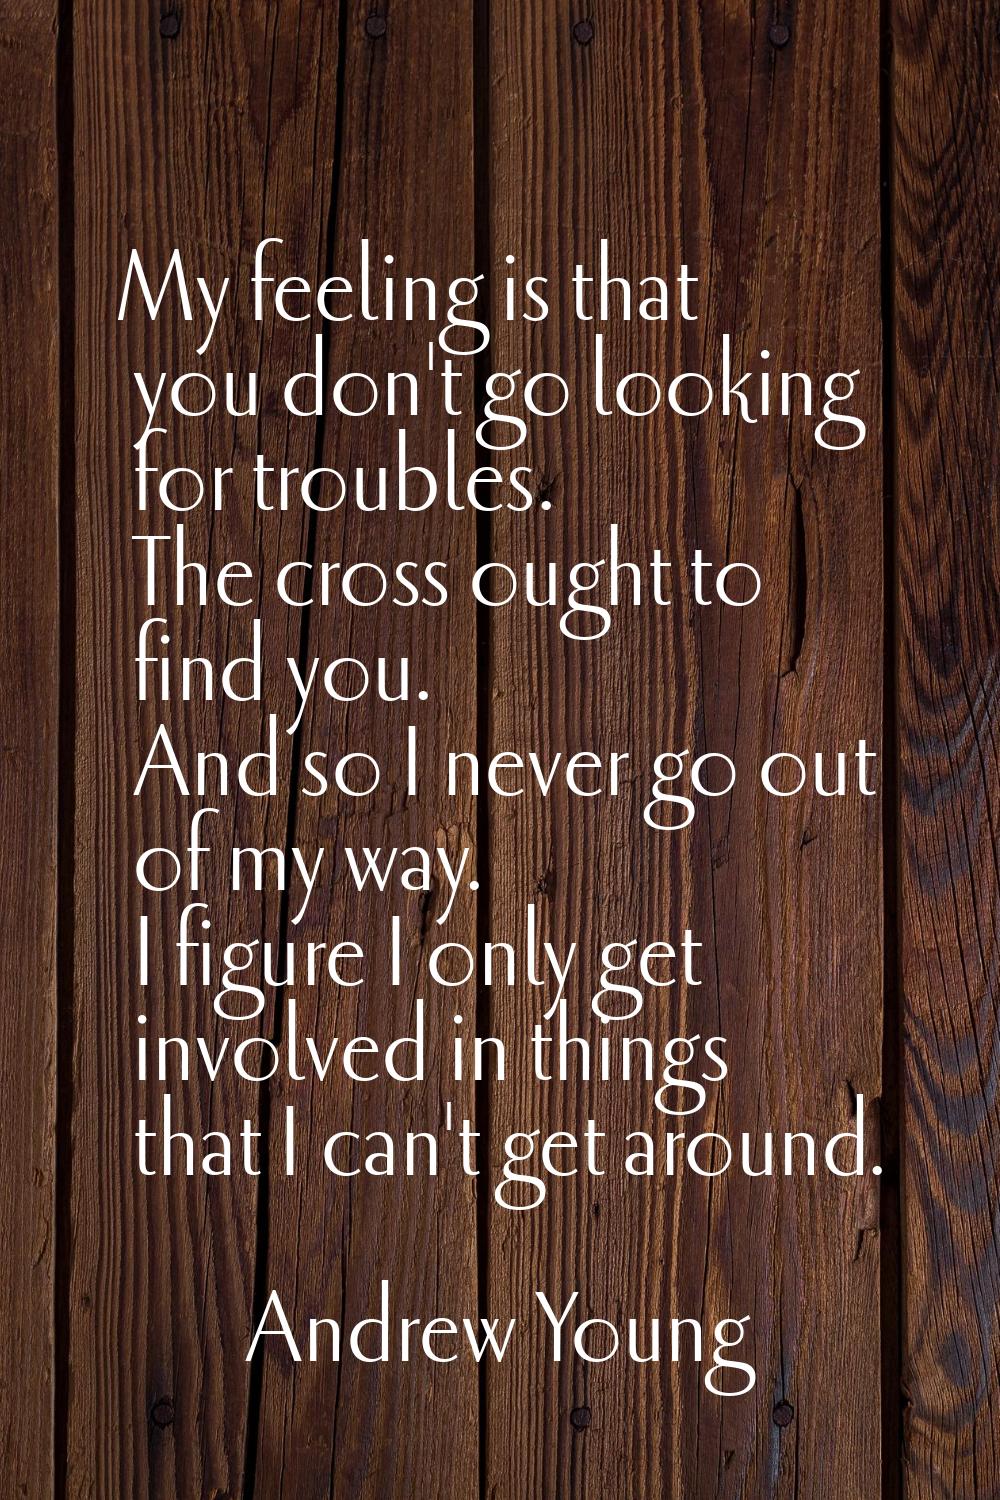 My feeling is that you don't go looking for troubles. The cross ought to find you. And so I never g